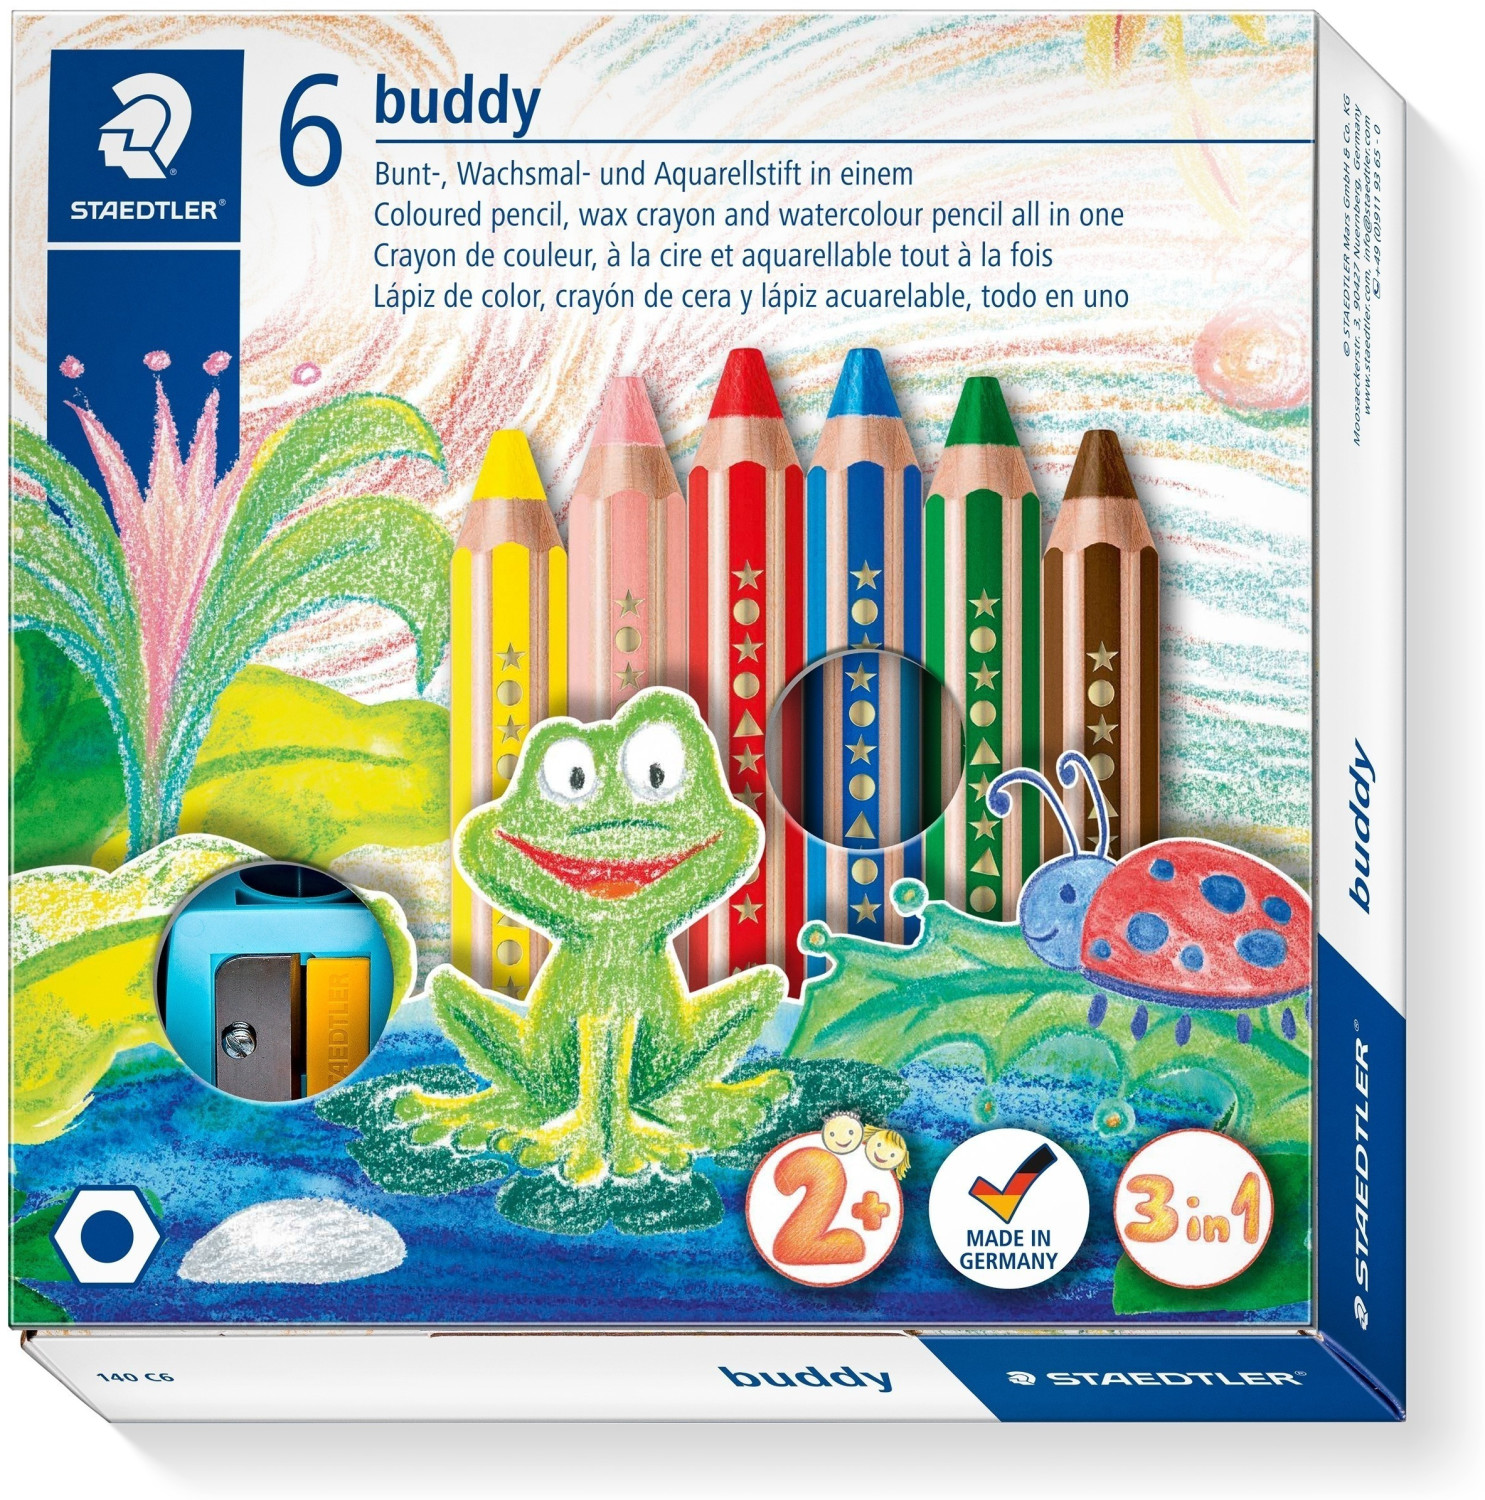 Photos - Creativity Set / Science Kit STAEDTLER buddy color pencils 3 in 1 6 pcs 